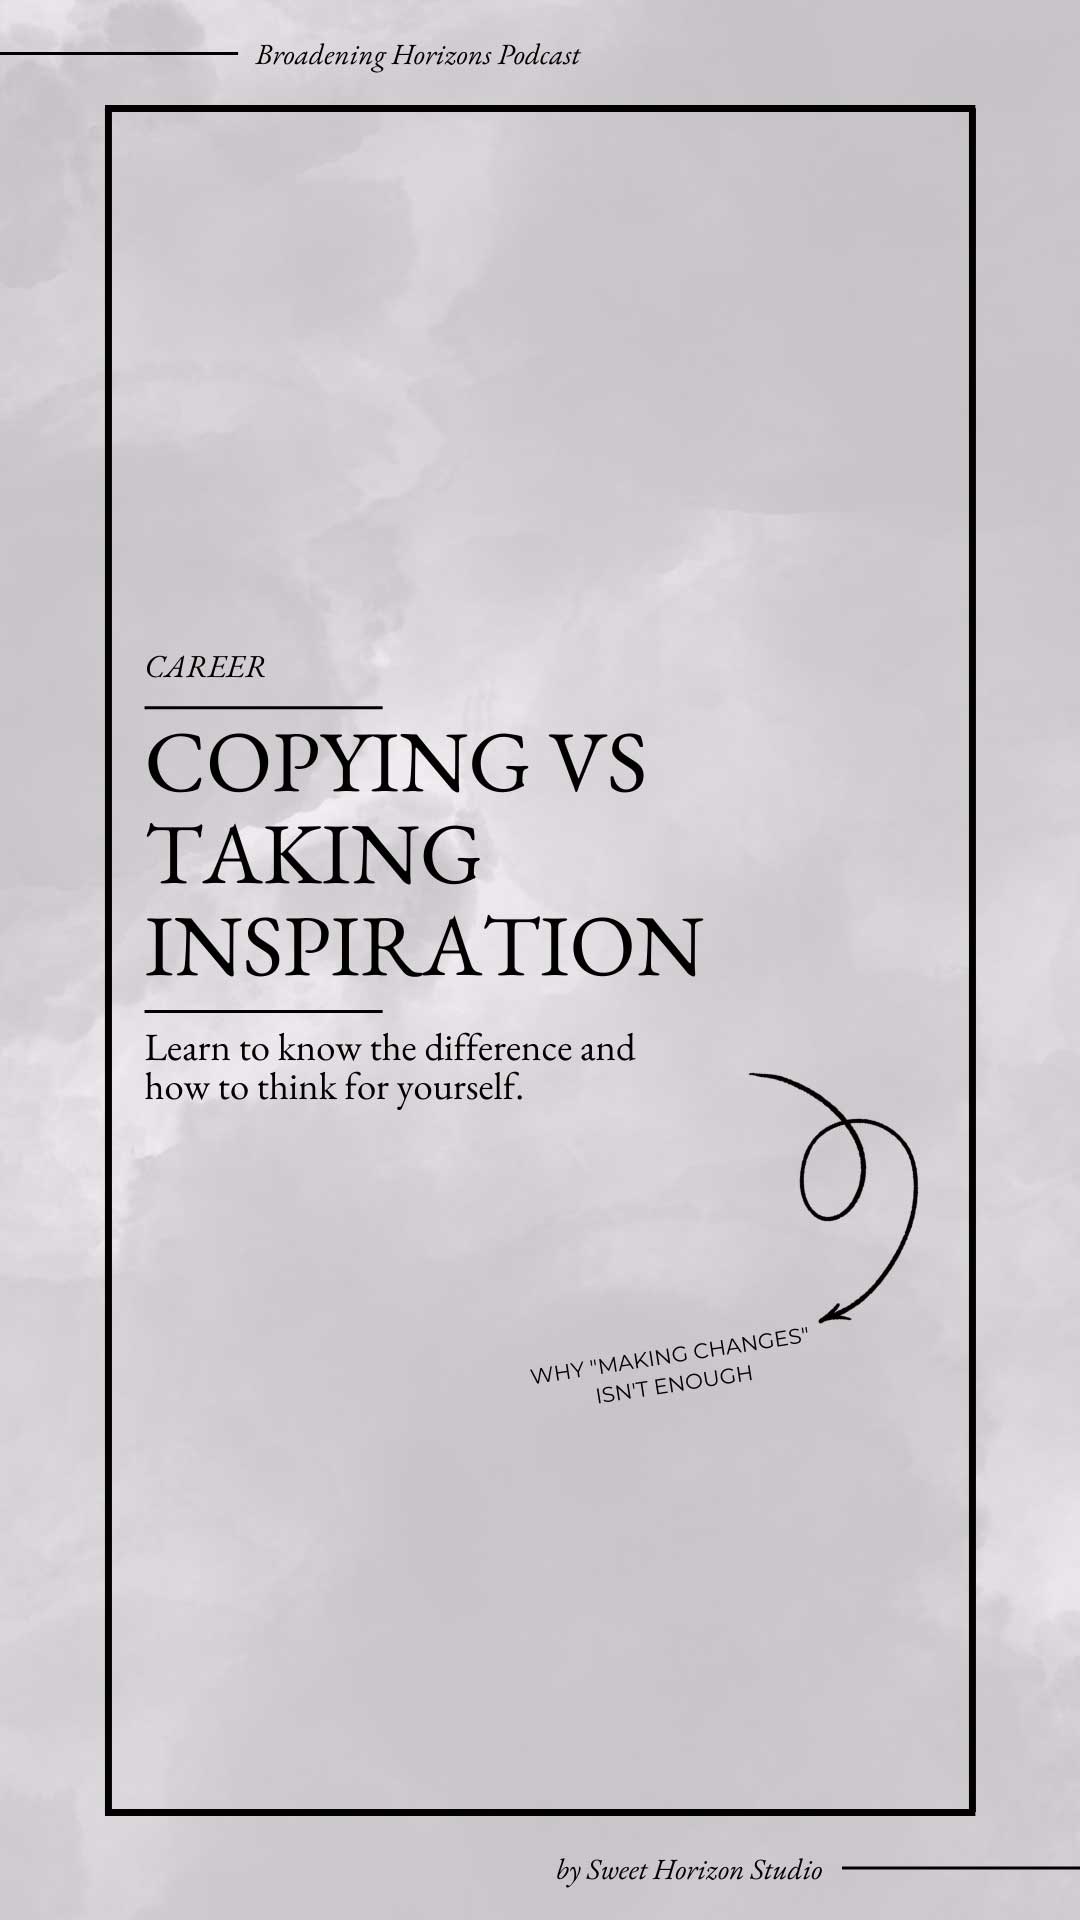 Copying vs Taking Inspiration : Know the Difference and Learn to Think for Yourself from www.sweethorizonblog.com